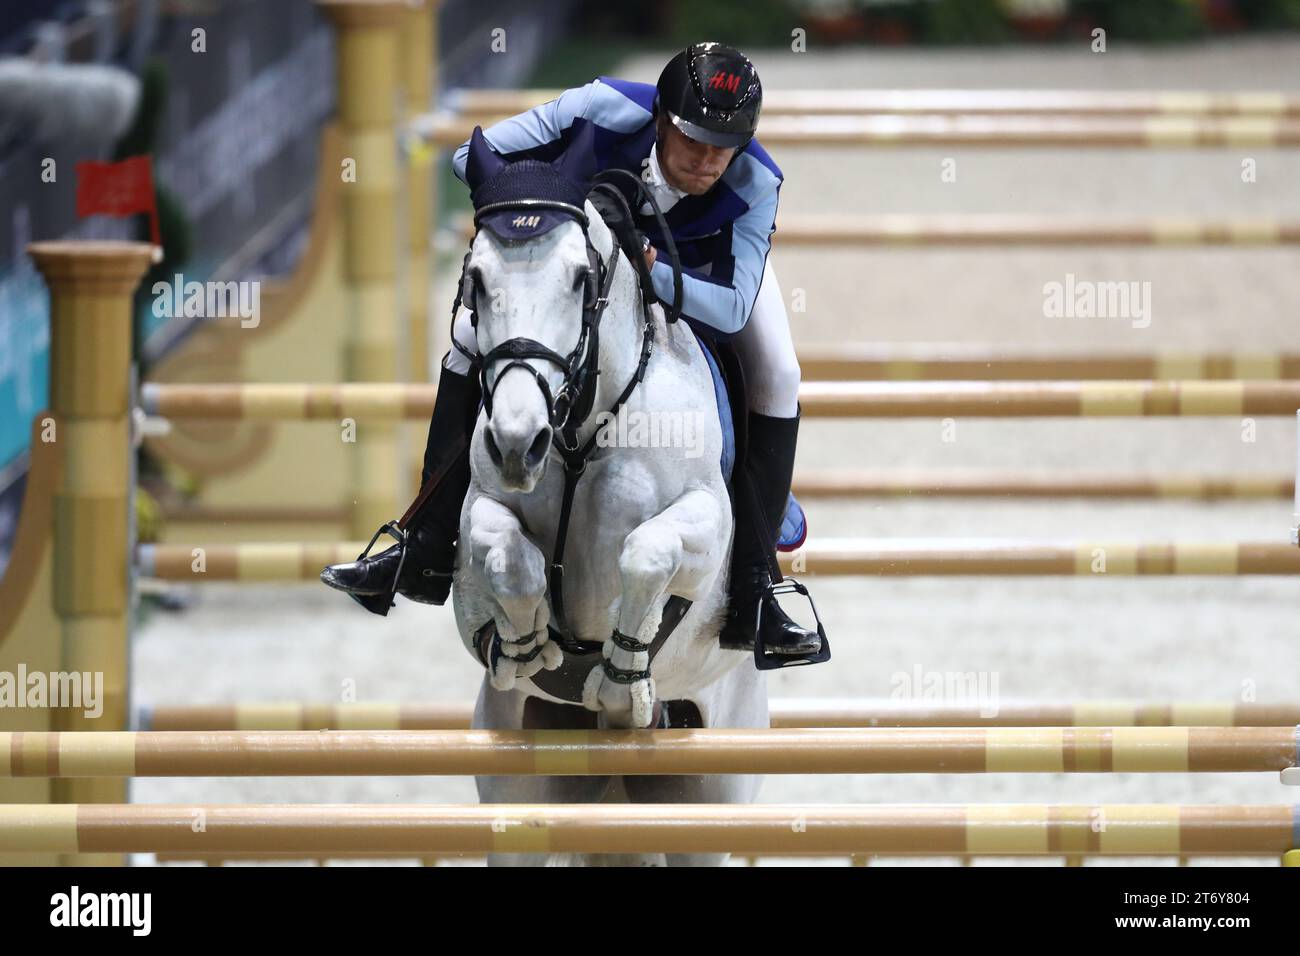 Olivier Philippaerts of Belgium competes in the LONGINES FEI Jumping World Cup™ Verona Stock Photo